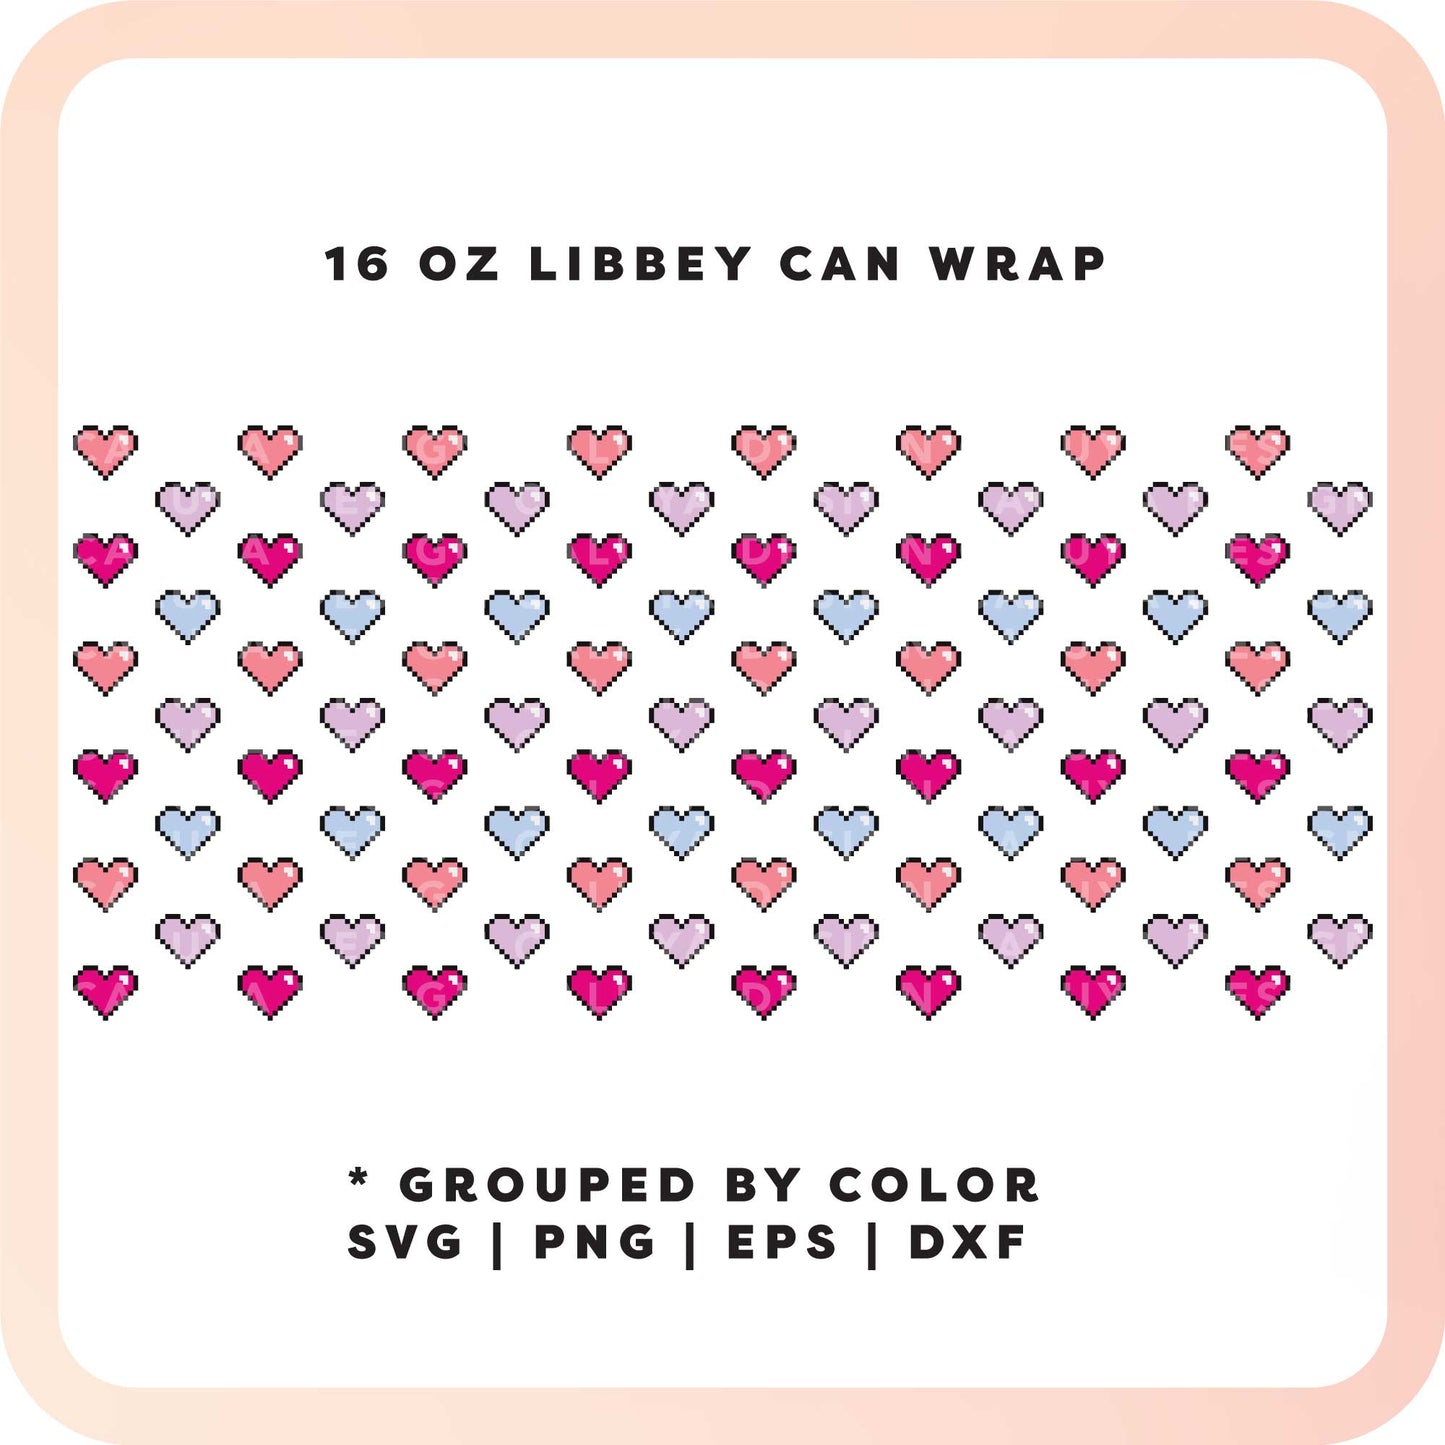 16oz Libbey Can Cup Wrap SVG | Pixel Hearts SVG